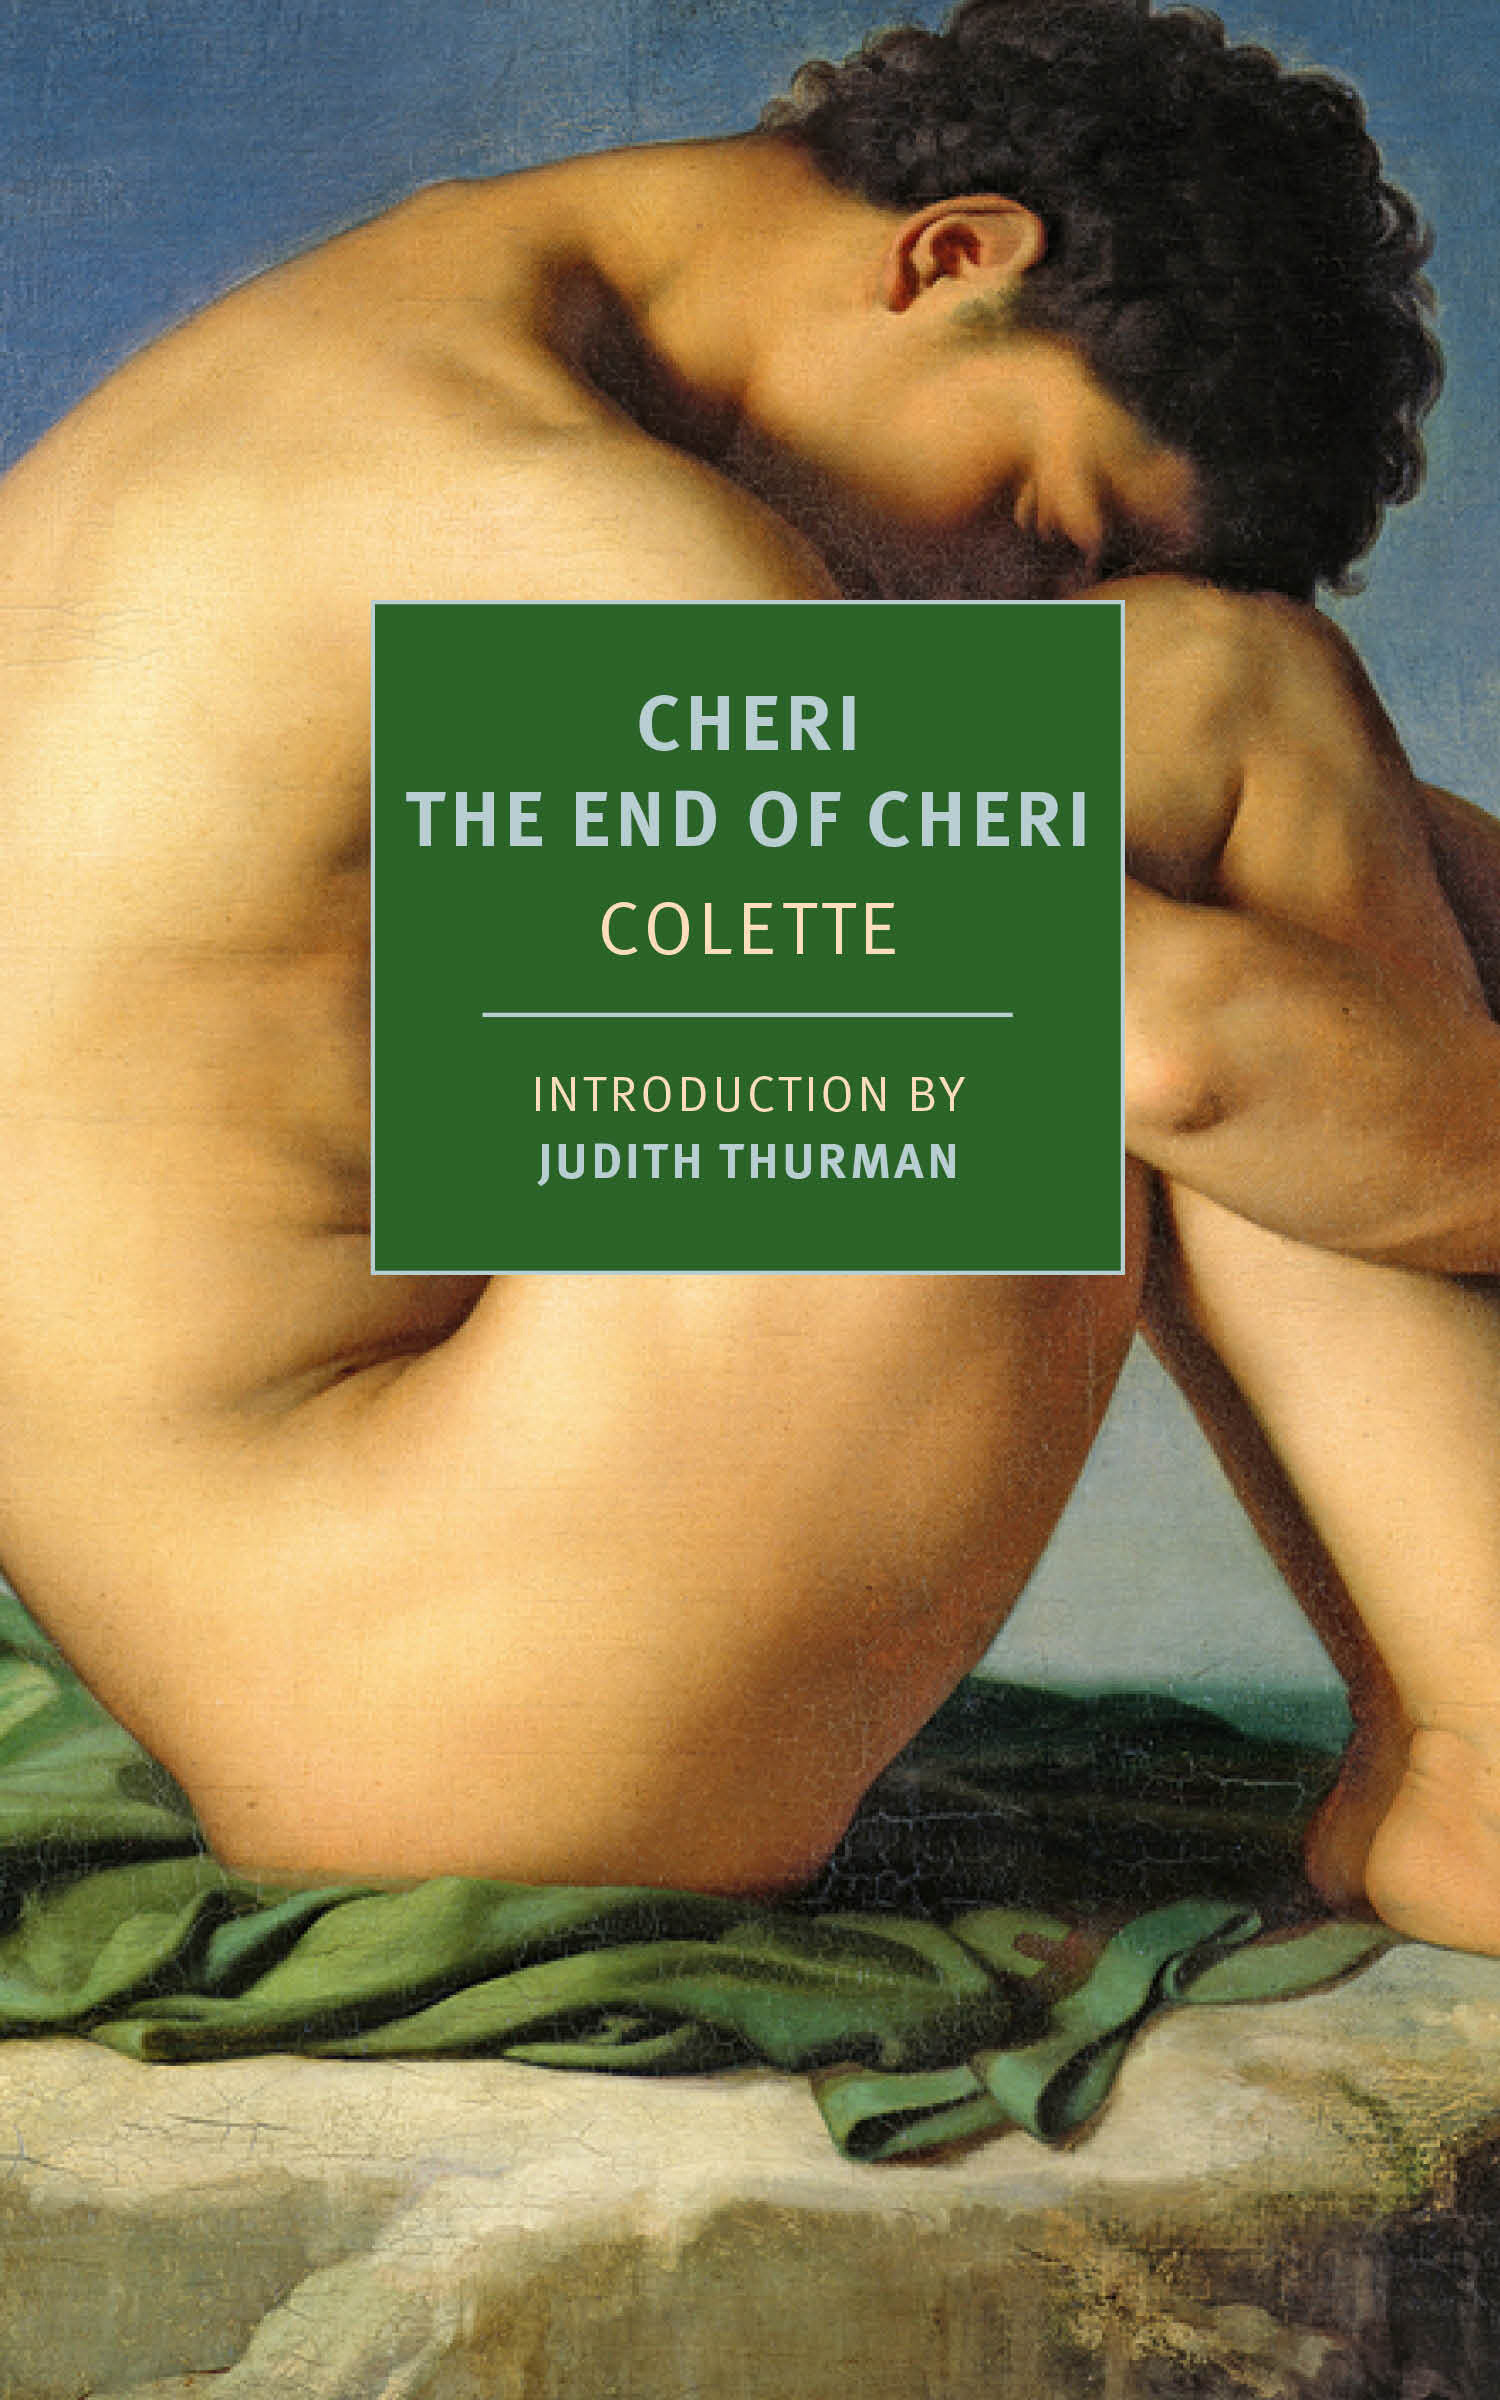 Paul Eprile, Colette, Judith Thurman: Chéri and the End of Chéri (2022, New York Review of Books, Incorporated, The)